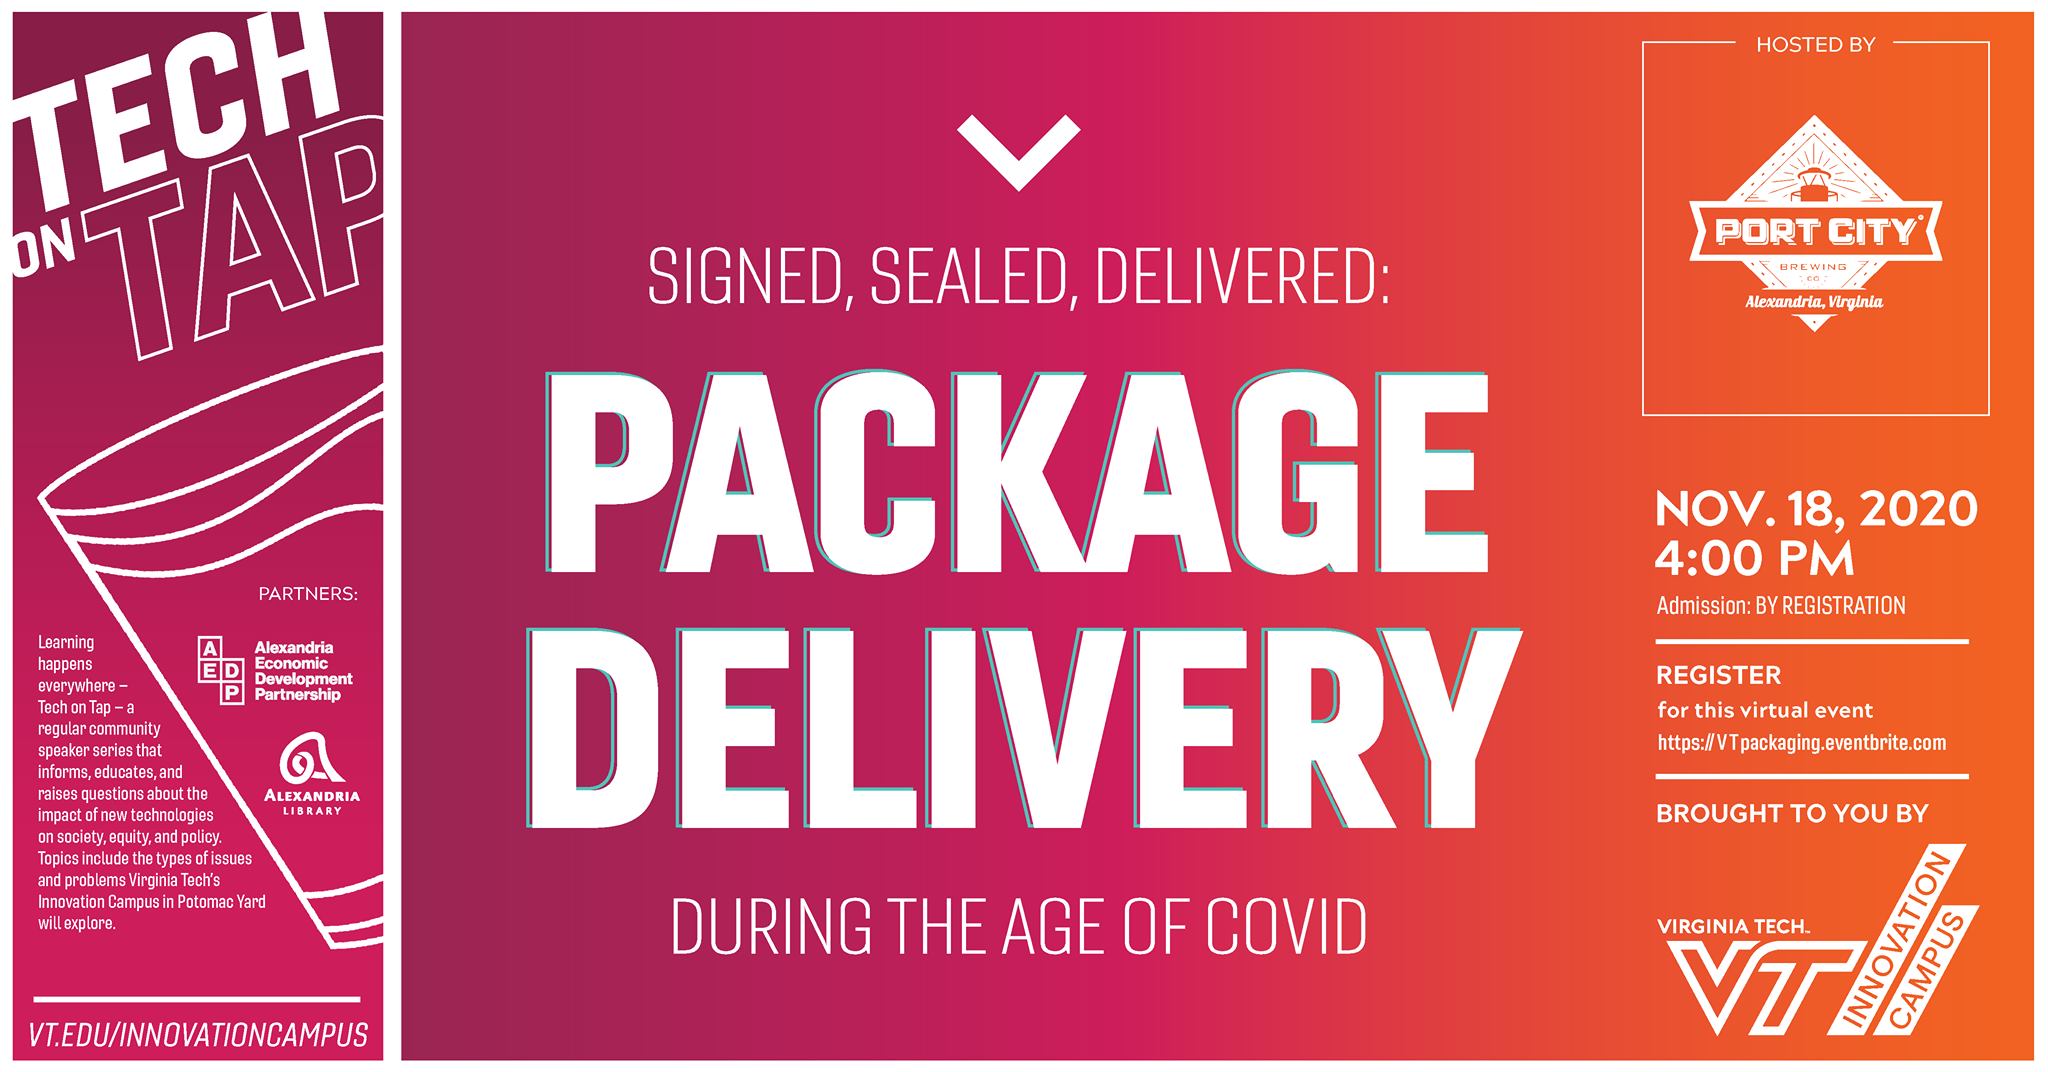 Tech on Tap: Signed, Sealed, Delivered - Package Delivery in the Age of COVID